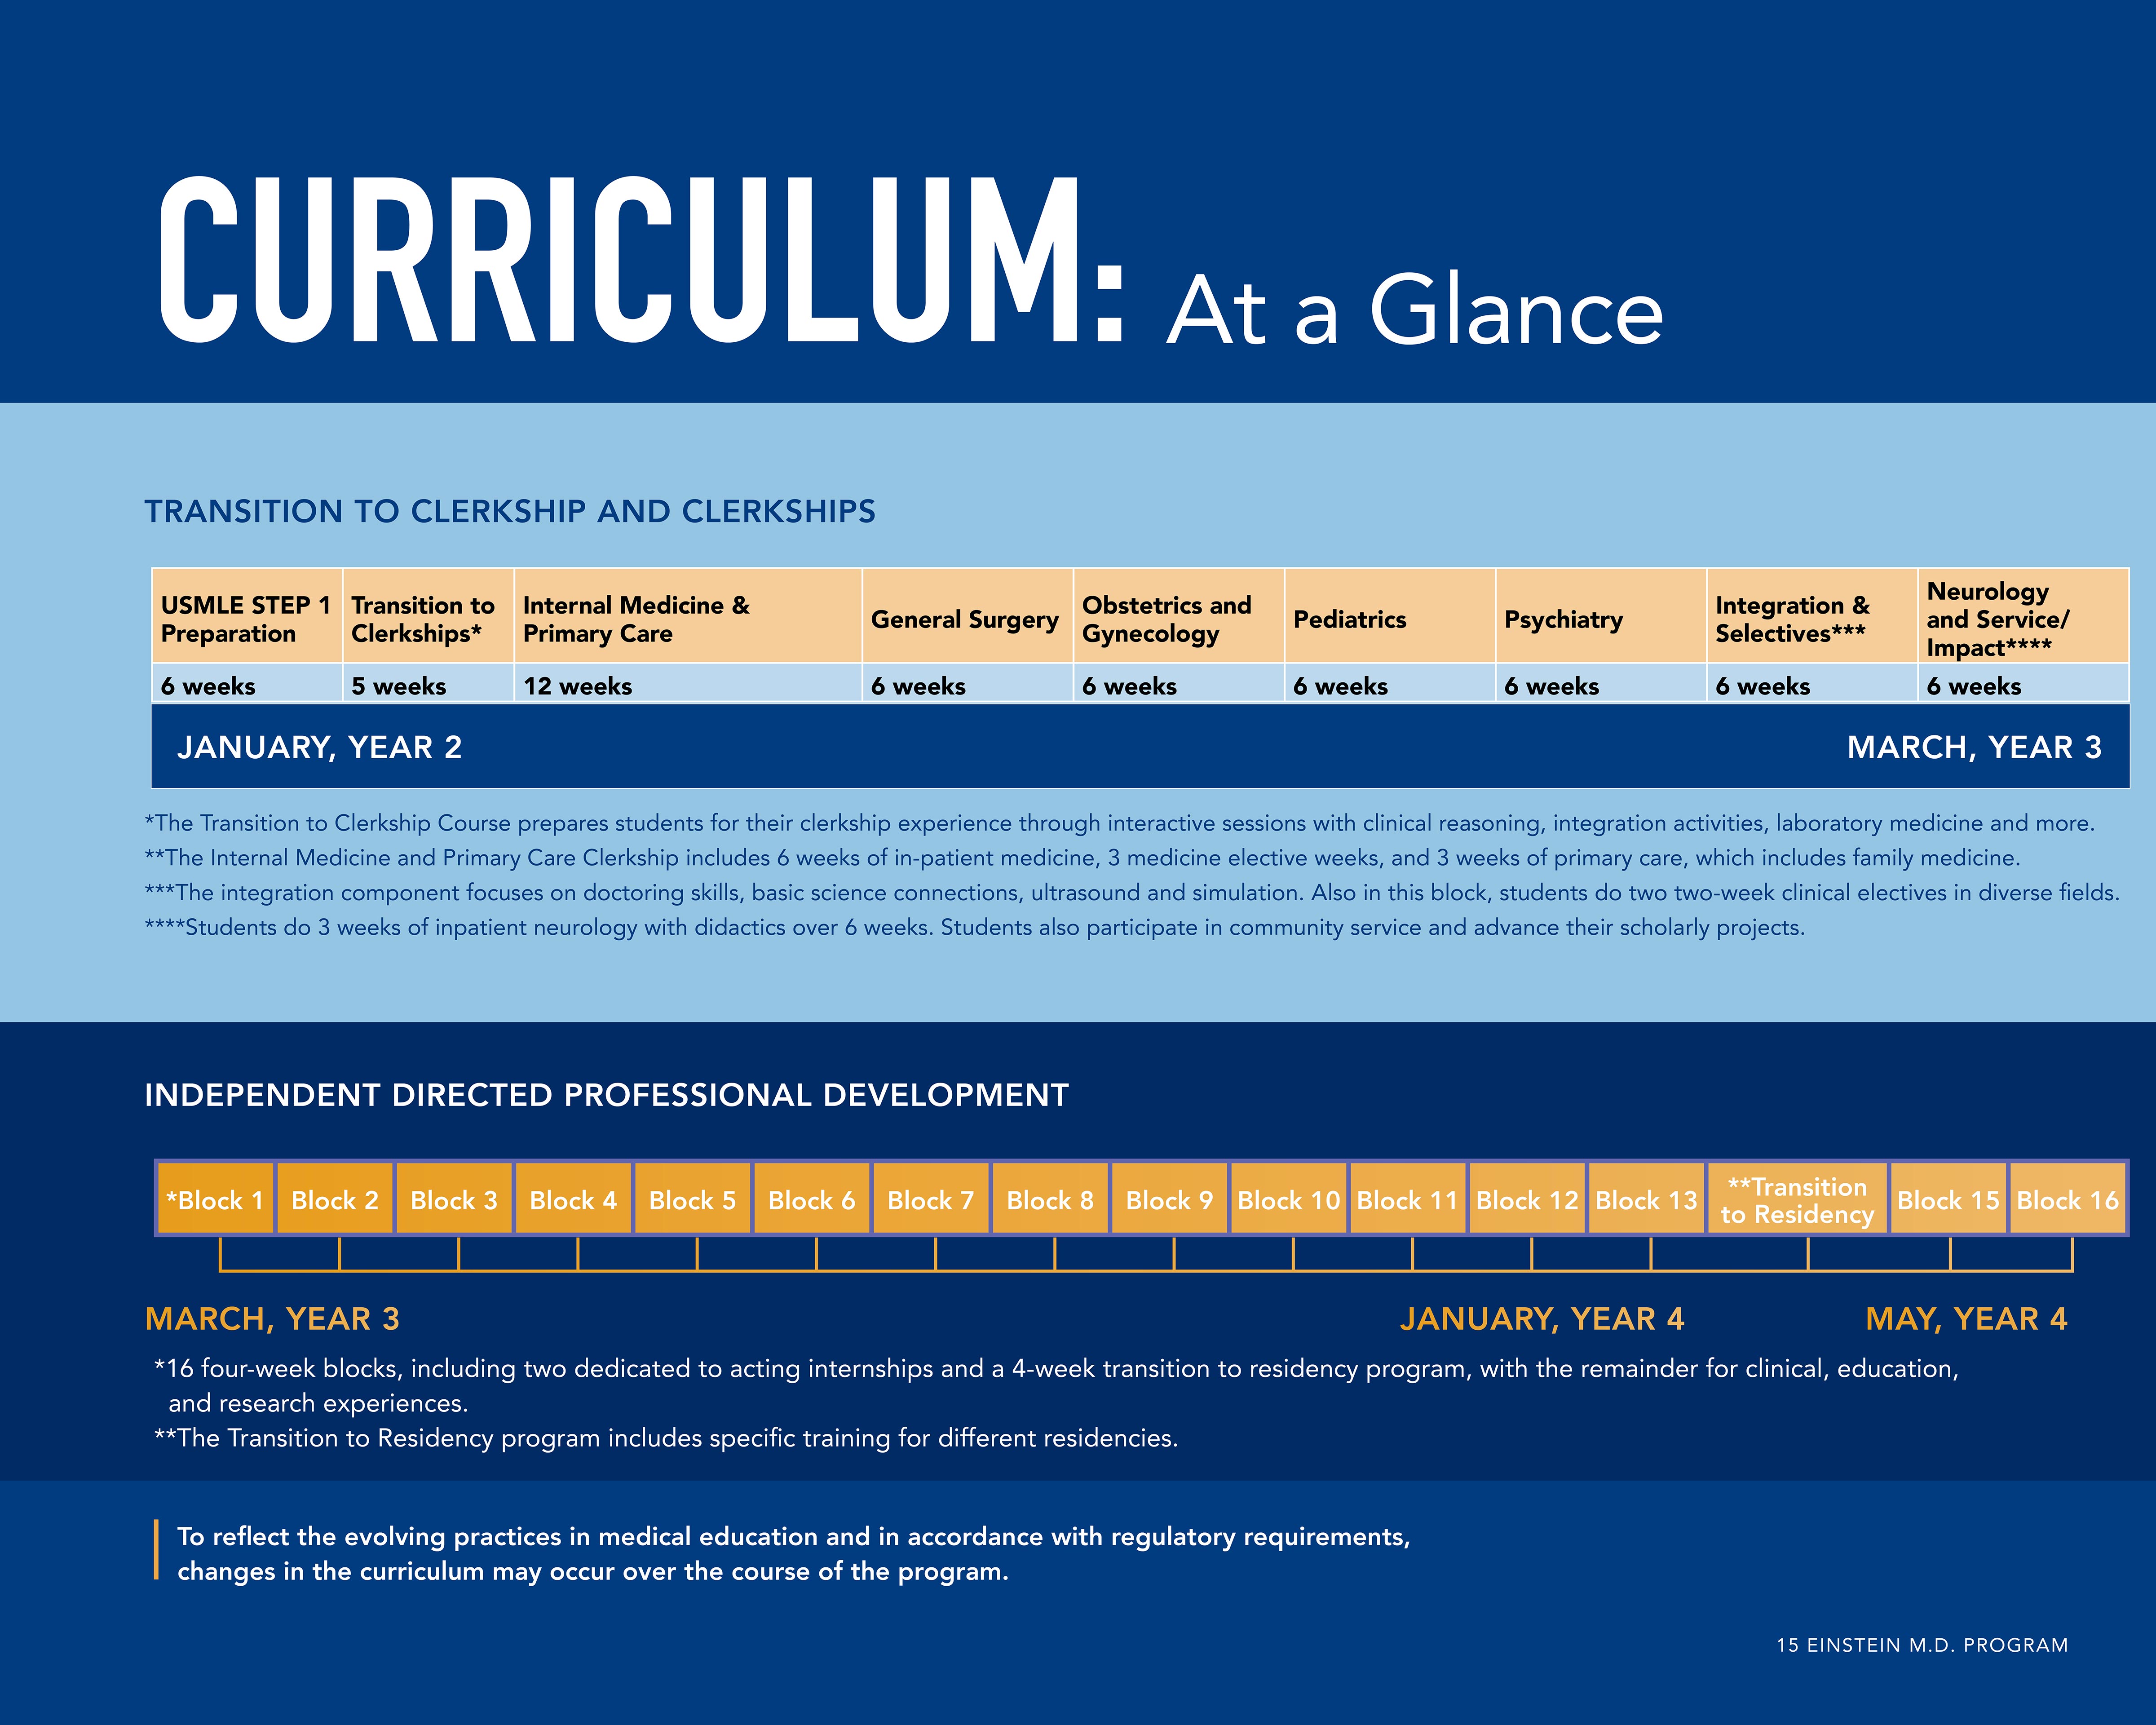 Curriculum Guide - Clerkships and Professional Development